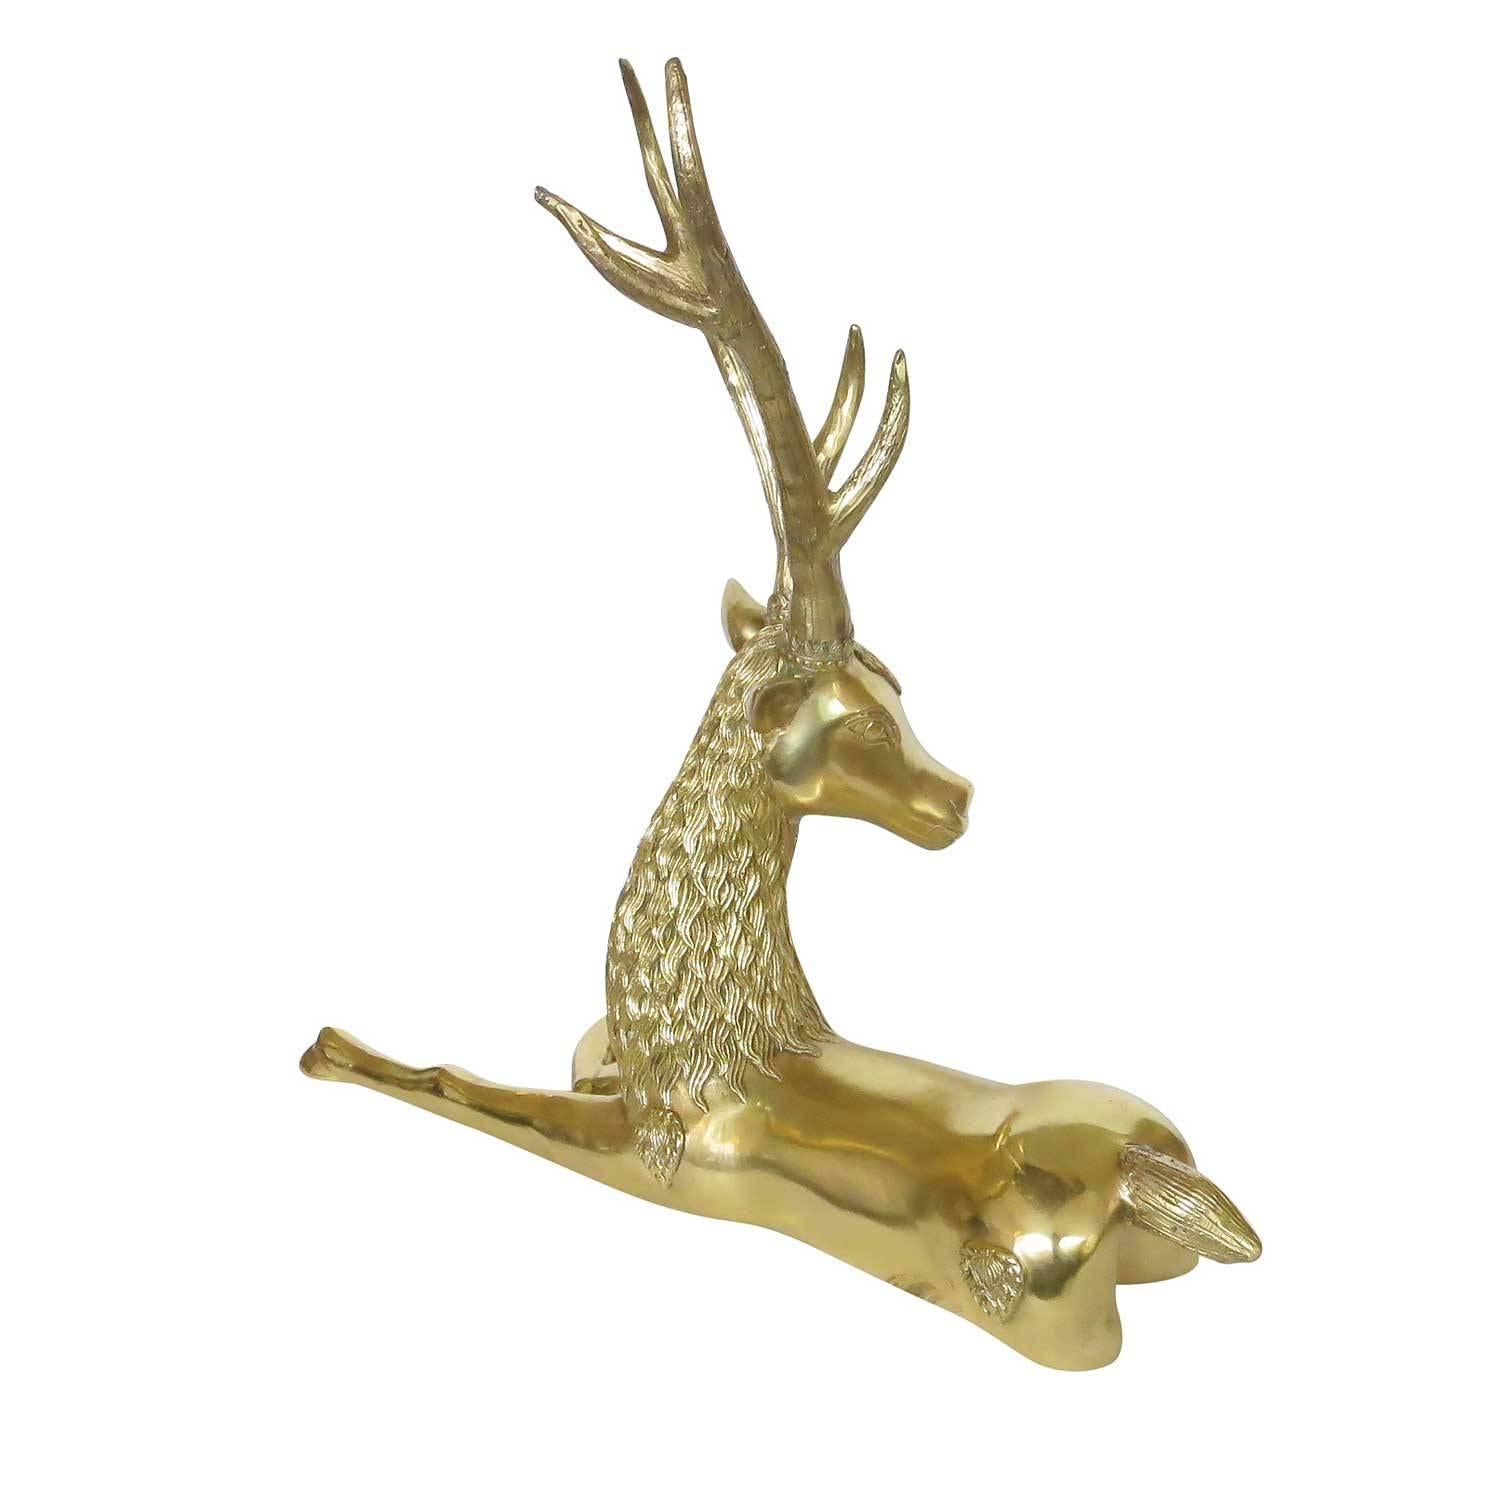 Large seat deer seated deer statue with decorative leaf accents by the Sarreid Ltd. 

Dimensions: 20